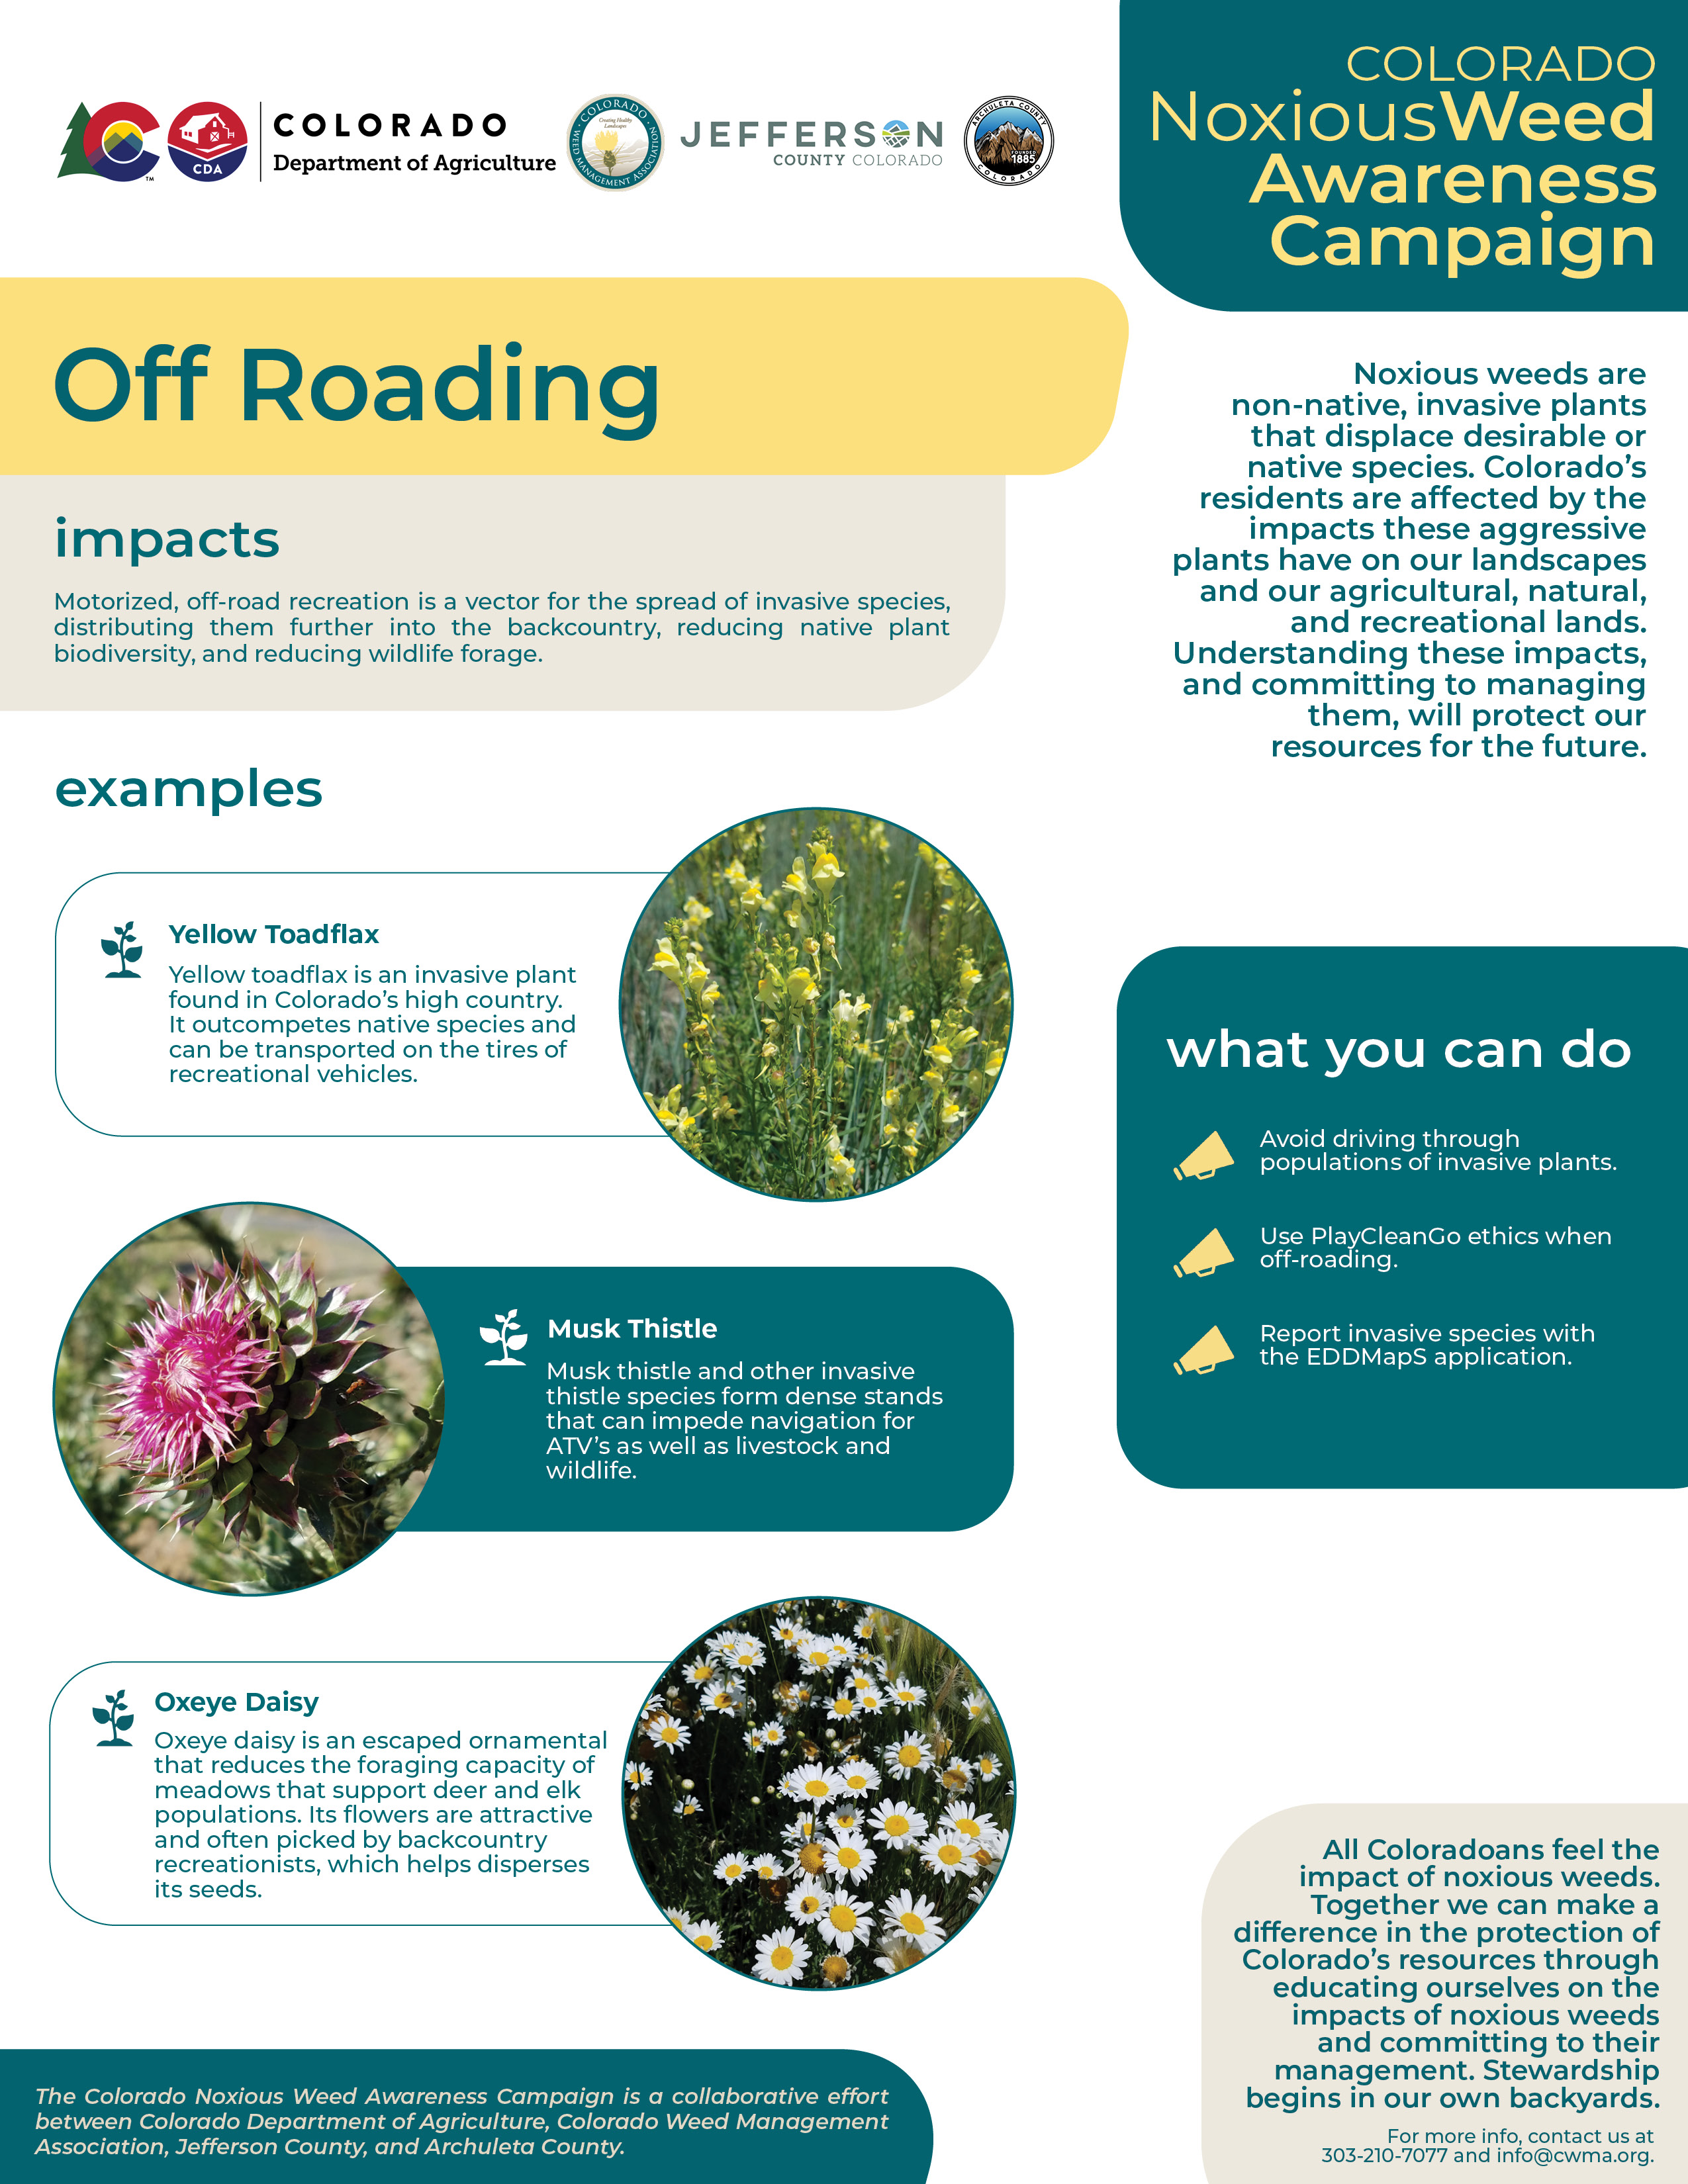 Graphic with information about how noxious weeds impact off roading.